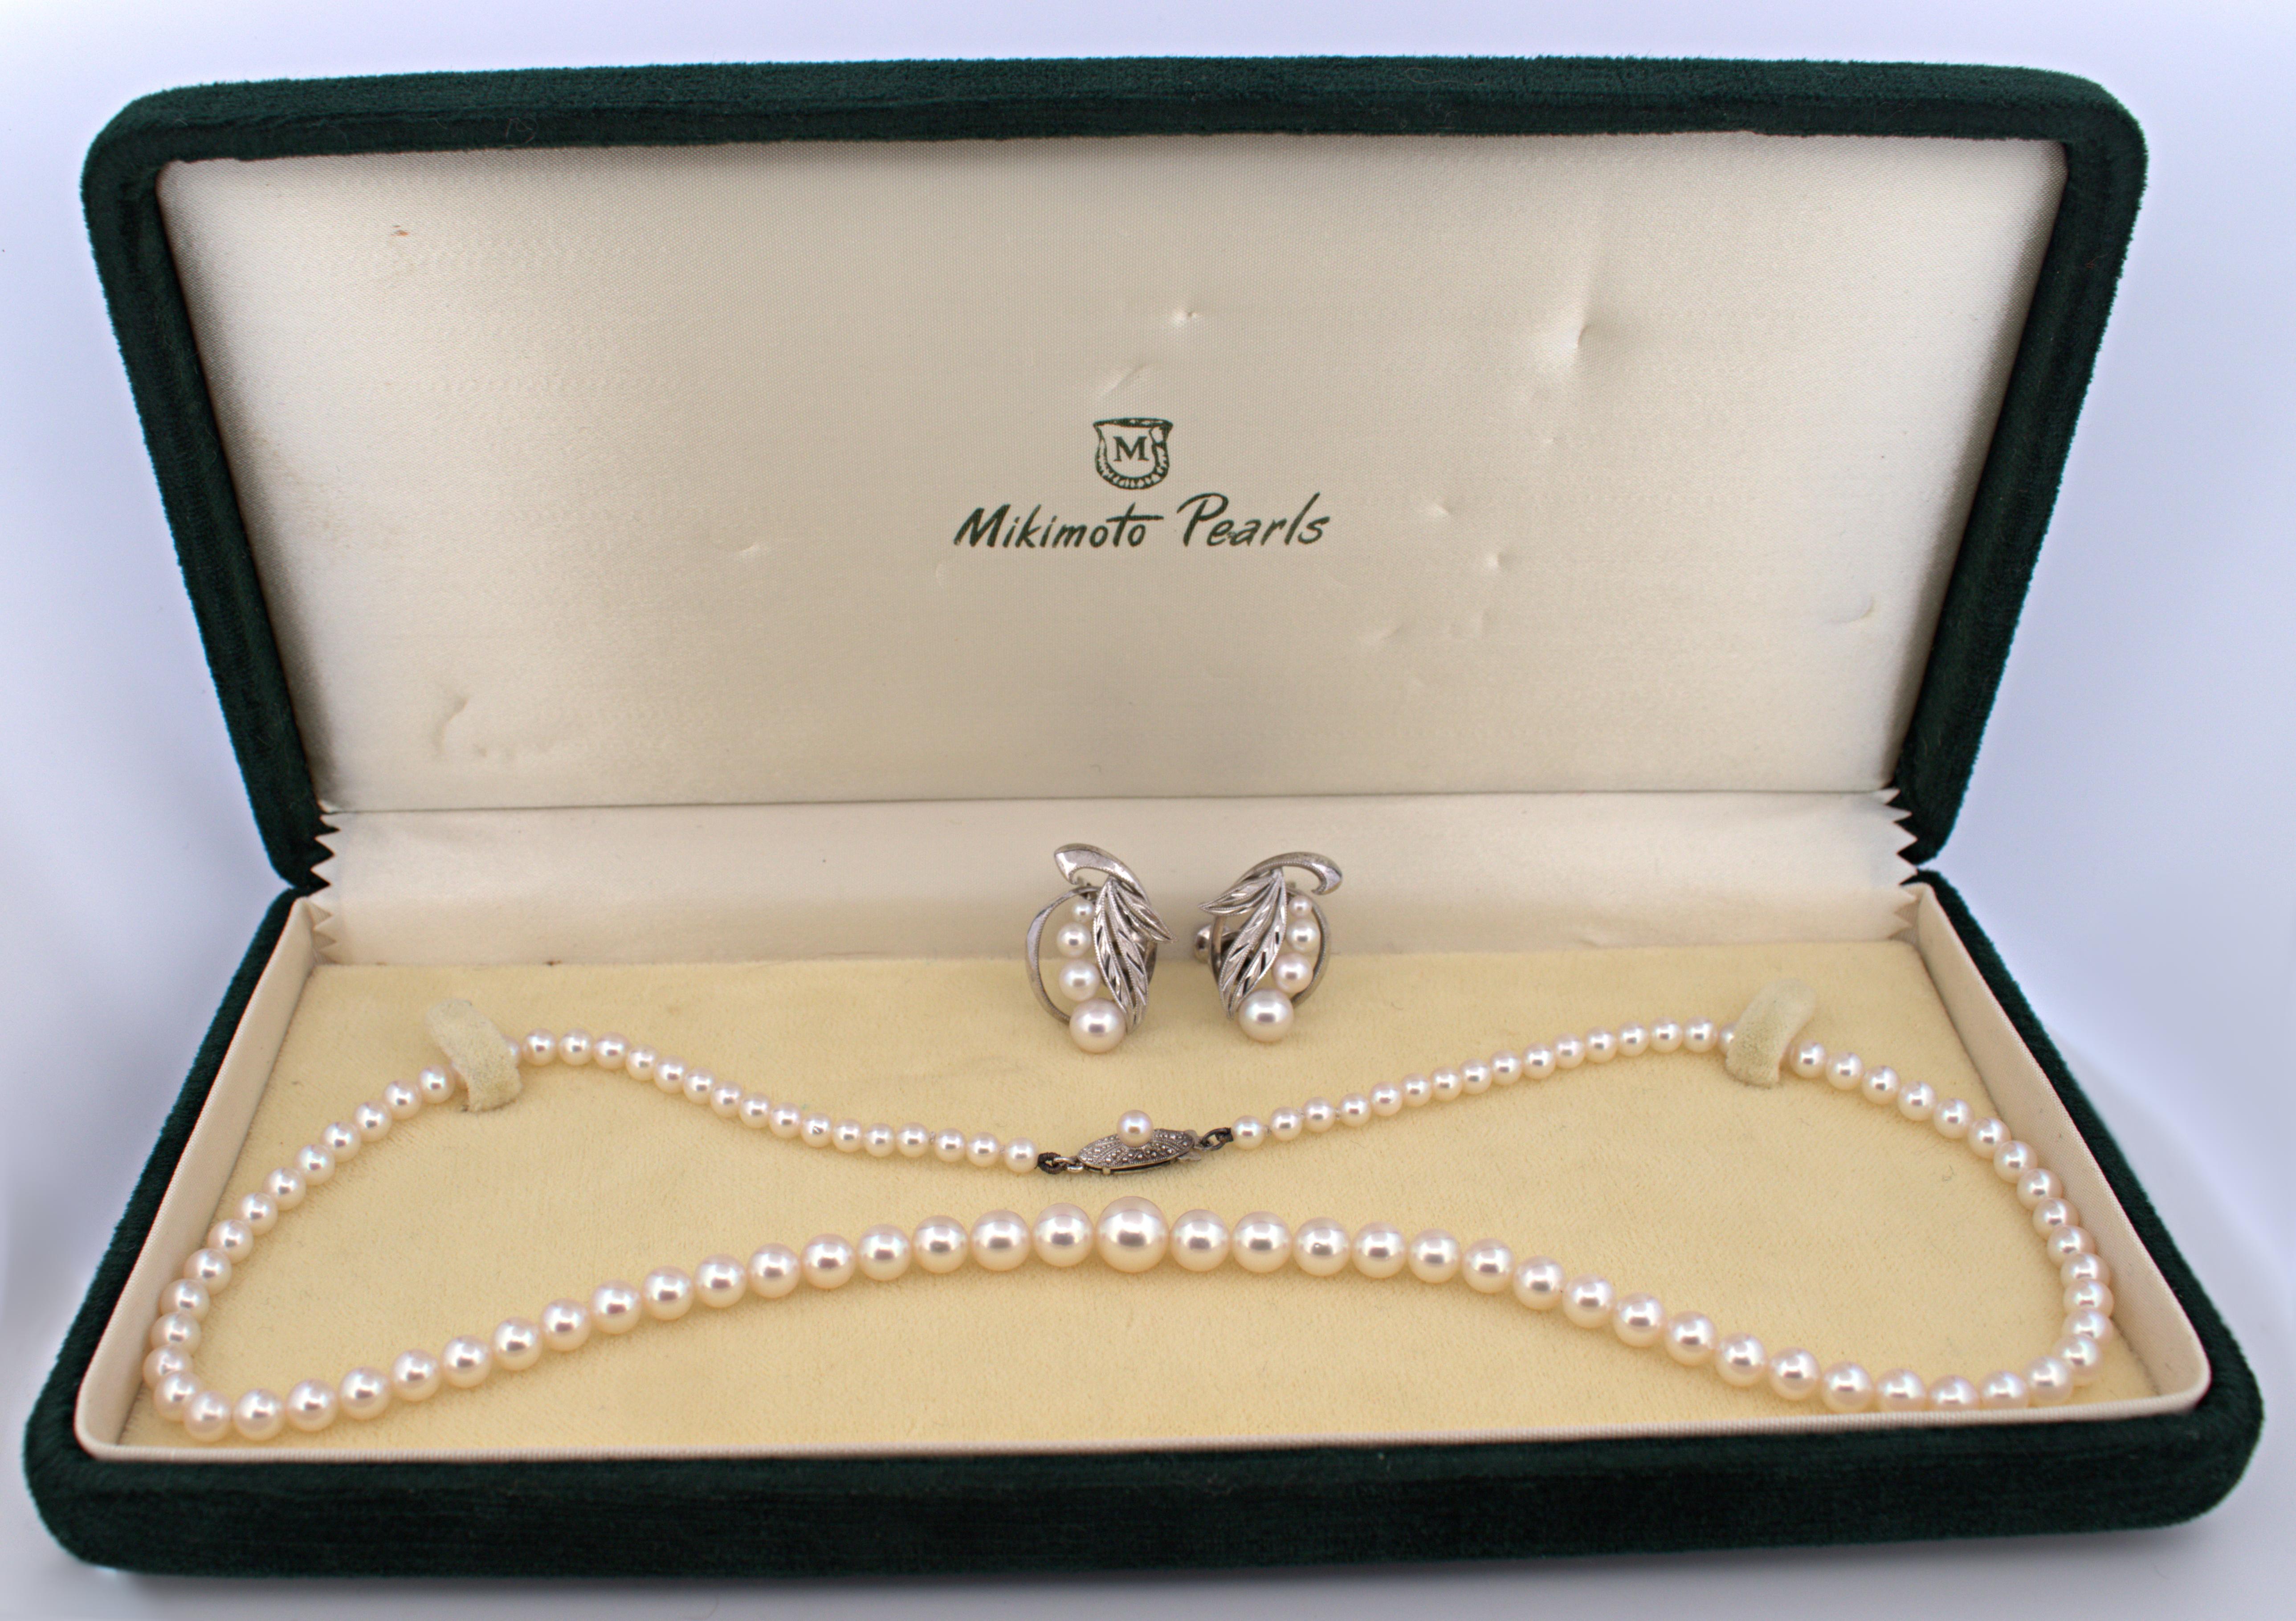 Including one necklace, composed of (97), graduated, lustrous, cultured Mikimoto pearls, ranging from
7.10 mm to 3.40 mm, completed by a silver Mikimoto fish hook clasp, forming a 17.5 inch, unknotted
necklace; together with a matching pair of